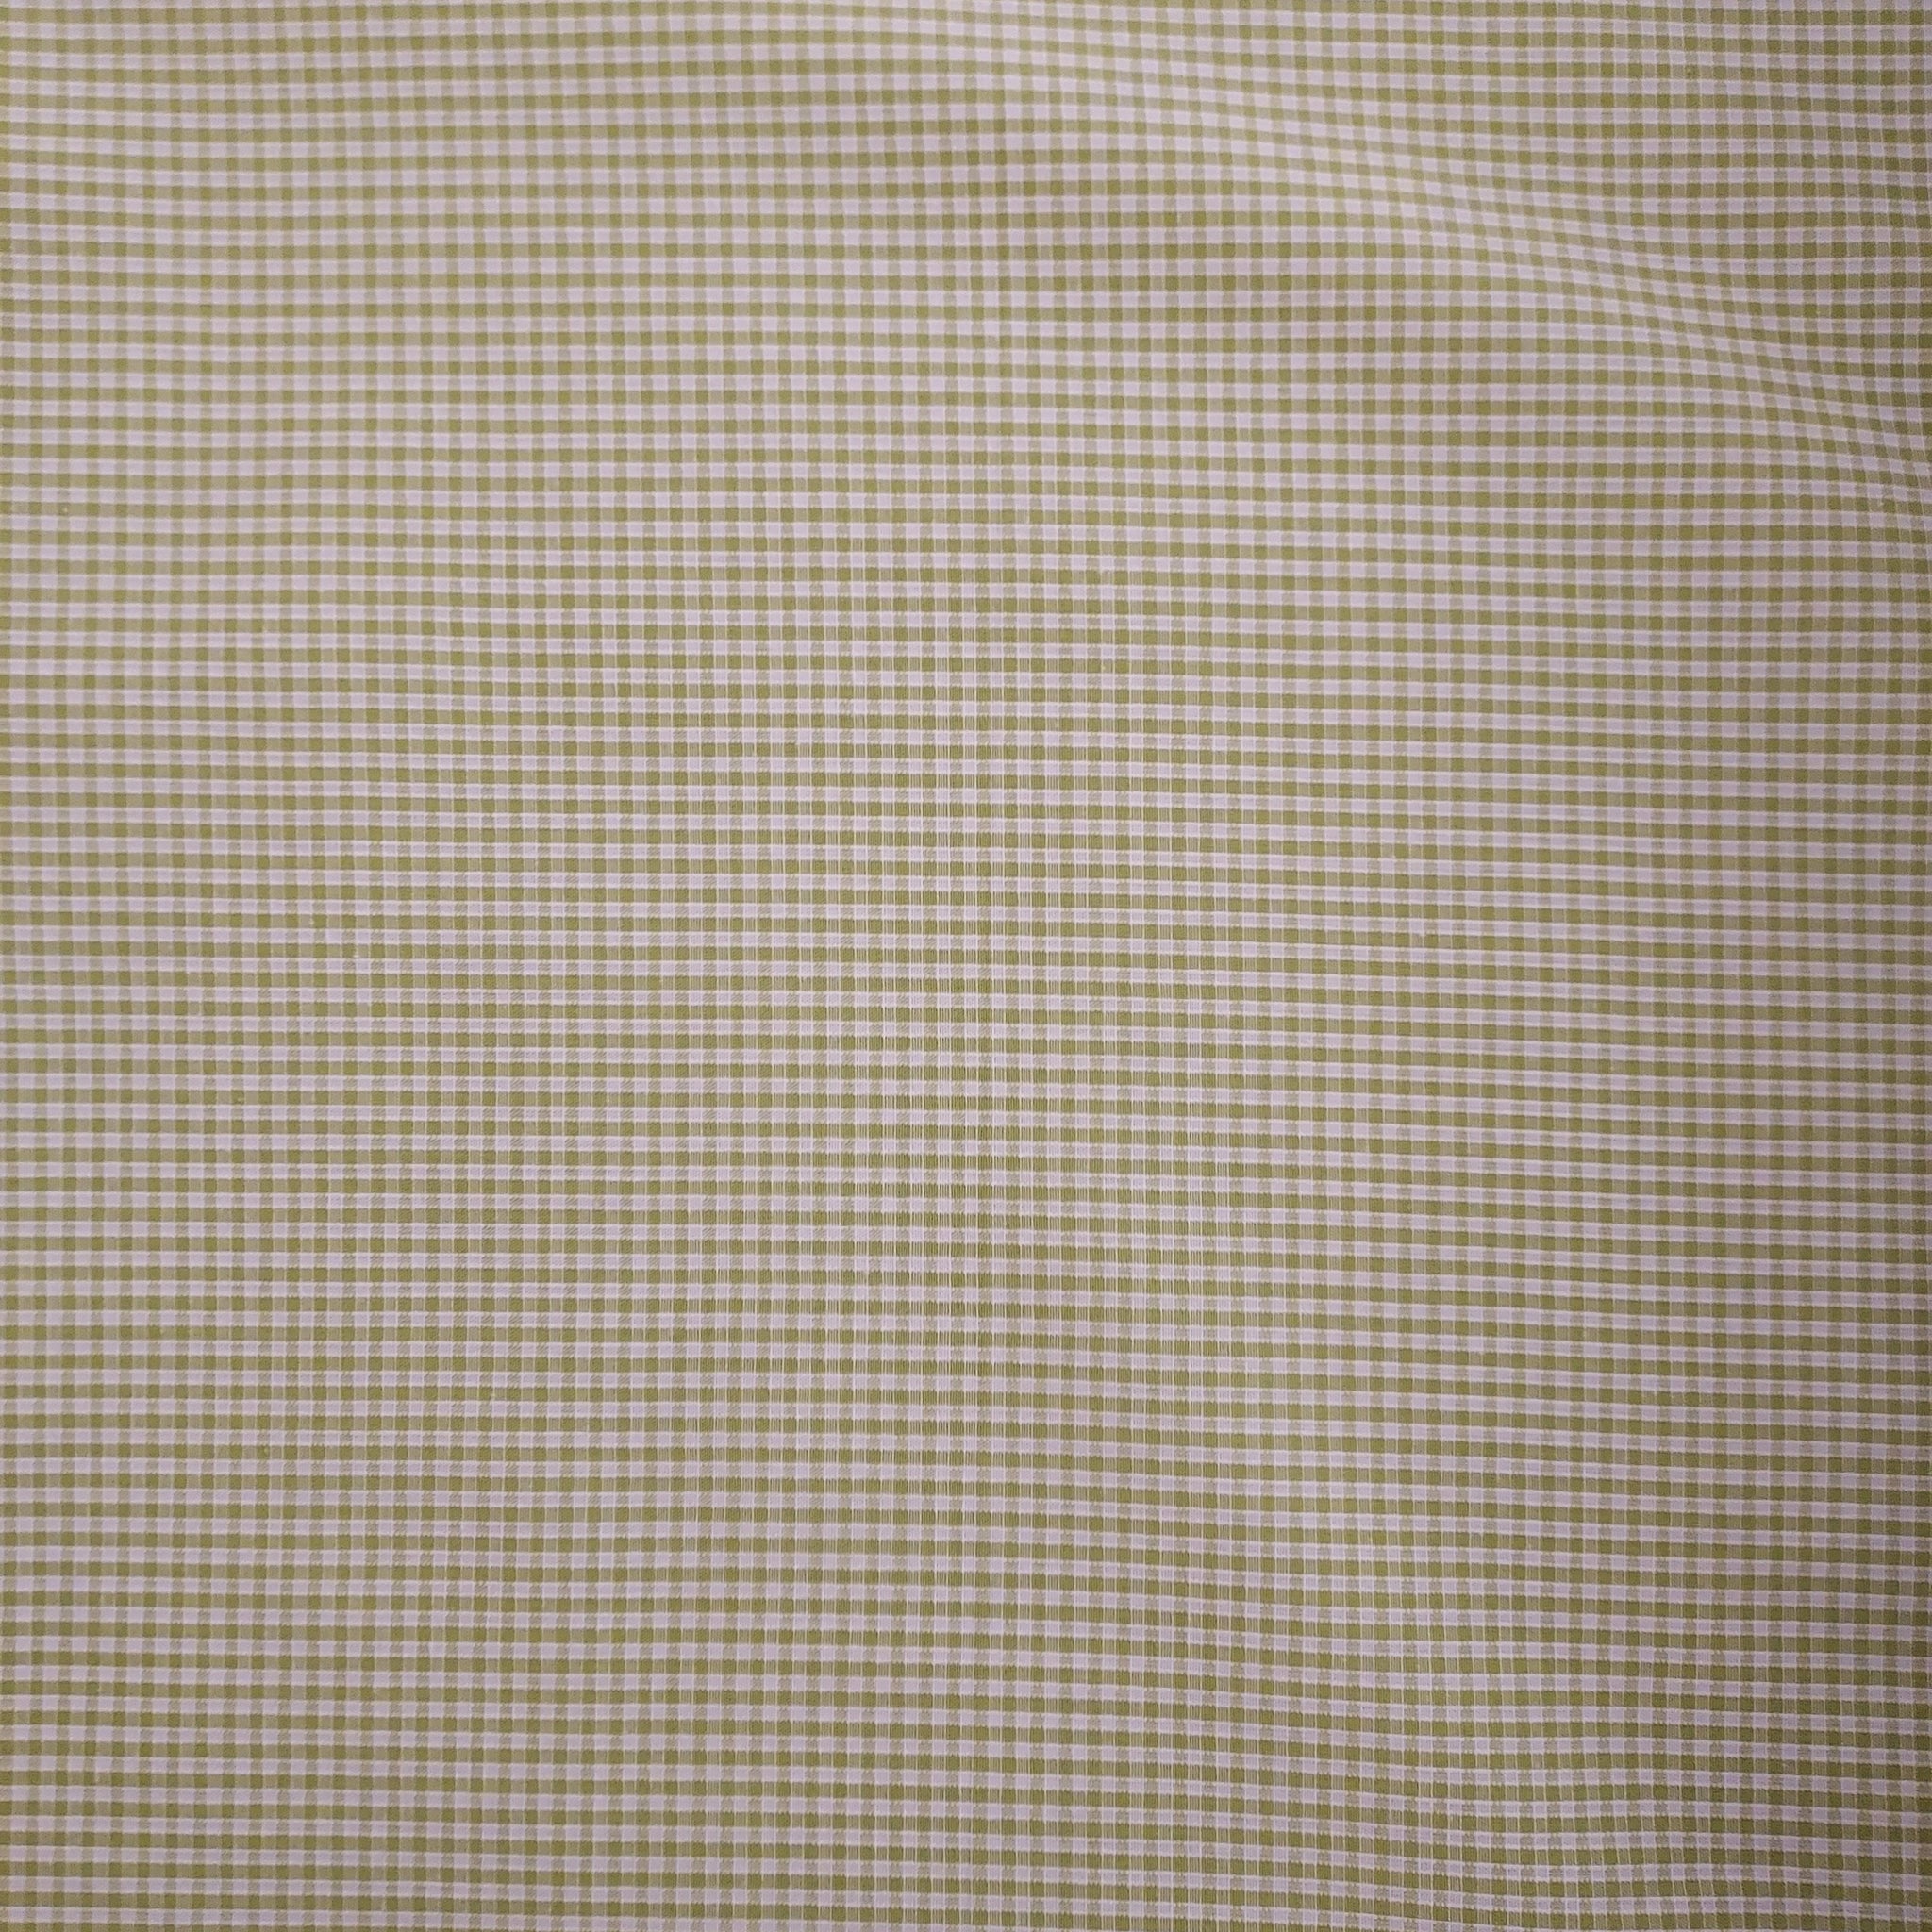 This adorable gingham is in a bright green with white. There is a nice texture to this fabric since it is a woven pattern. Perfect for clothing or decorations.   100% Cotton, 60" wide